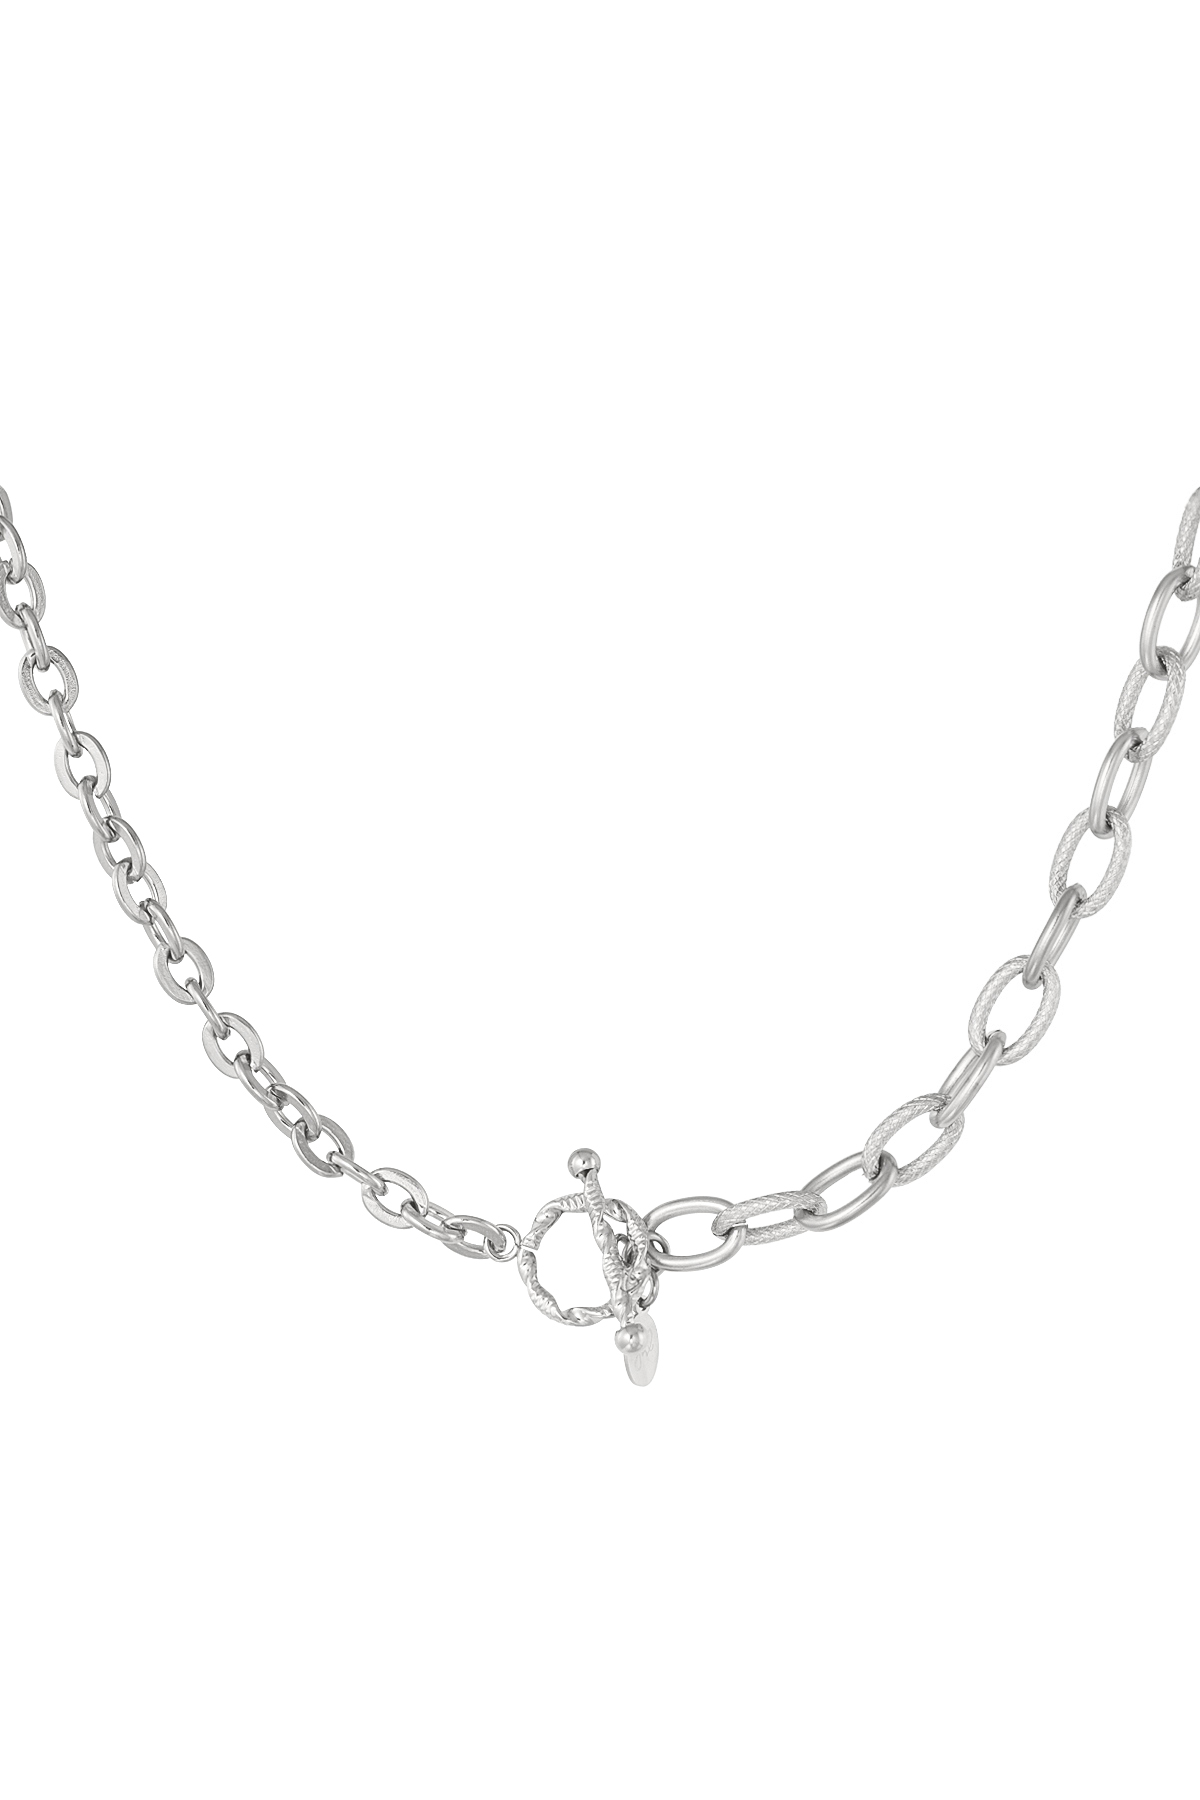 Link chain 2 sizes with round closure - silver